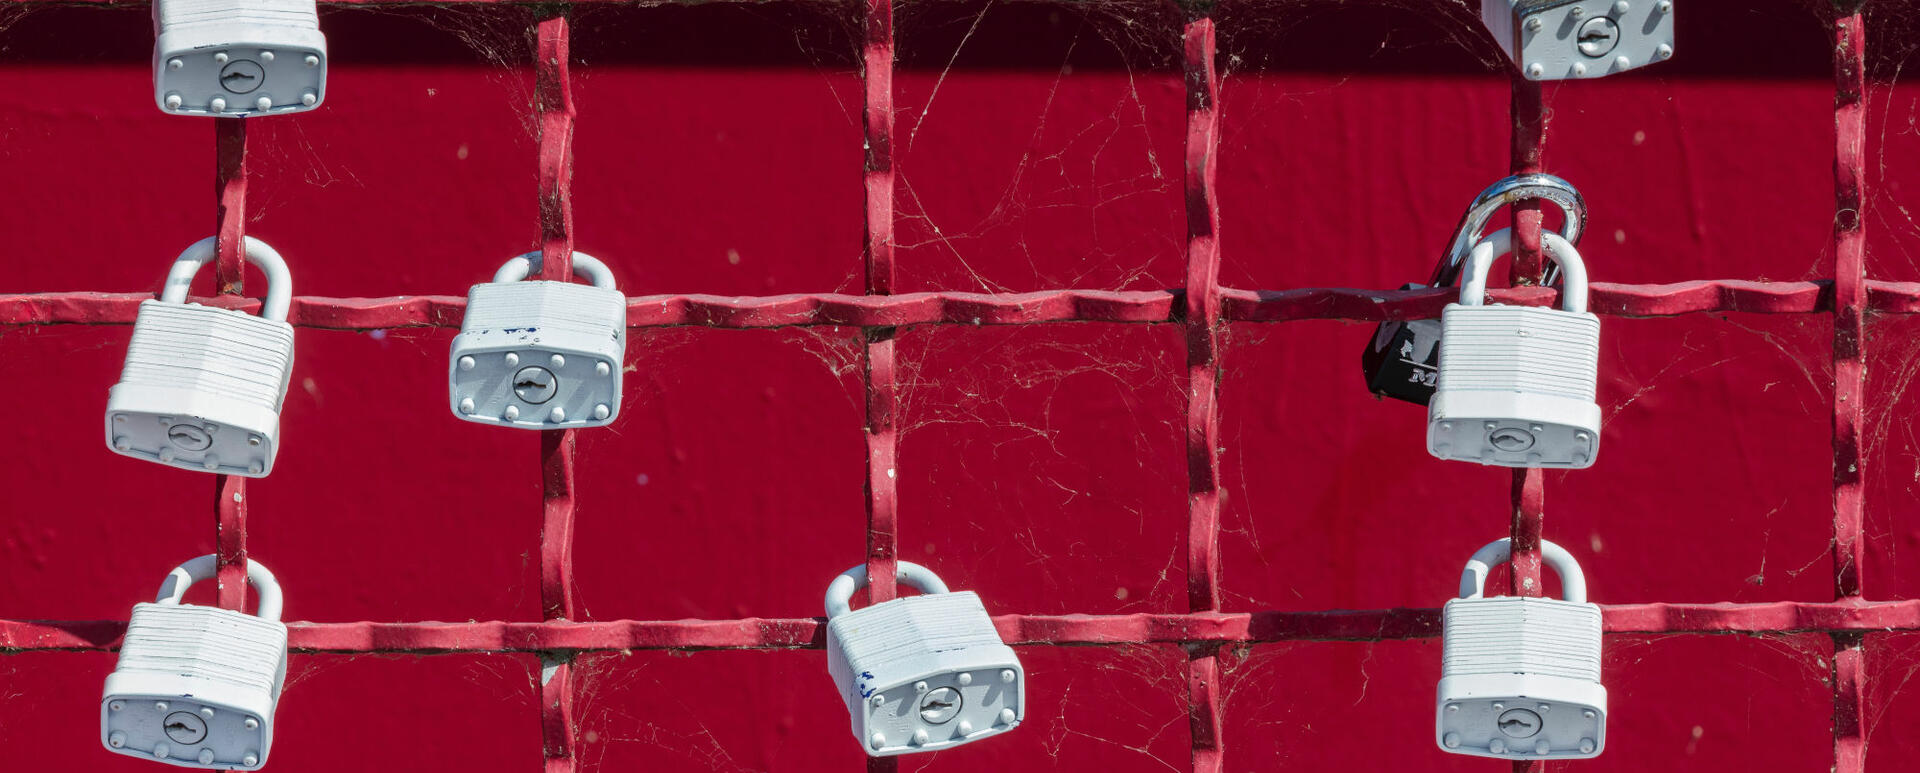 Grey padlocks at red fence - symbol of security